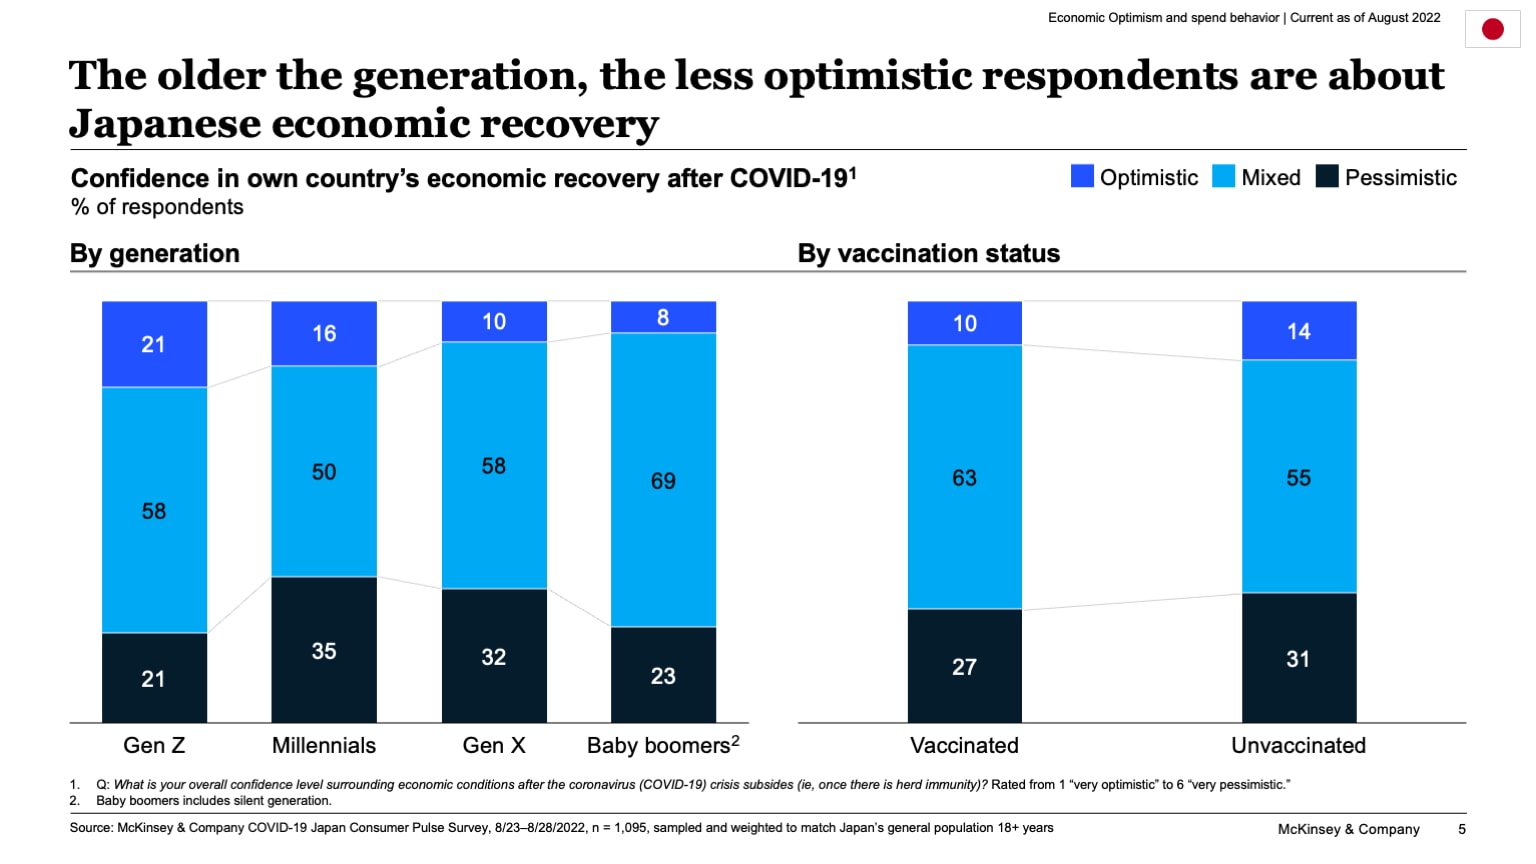 The older the generation, the less optimistic respondents are about Japanese economic recovery